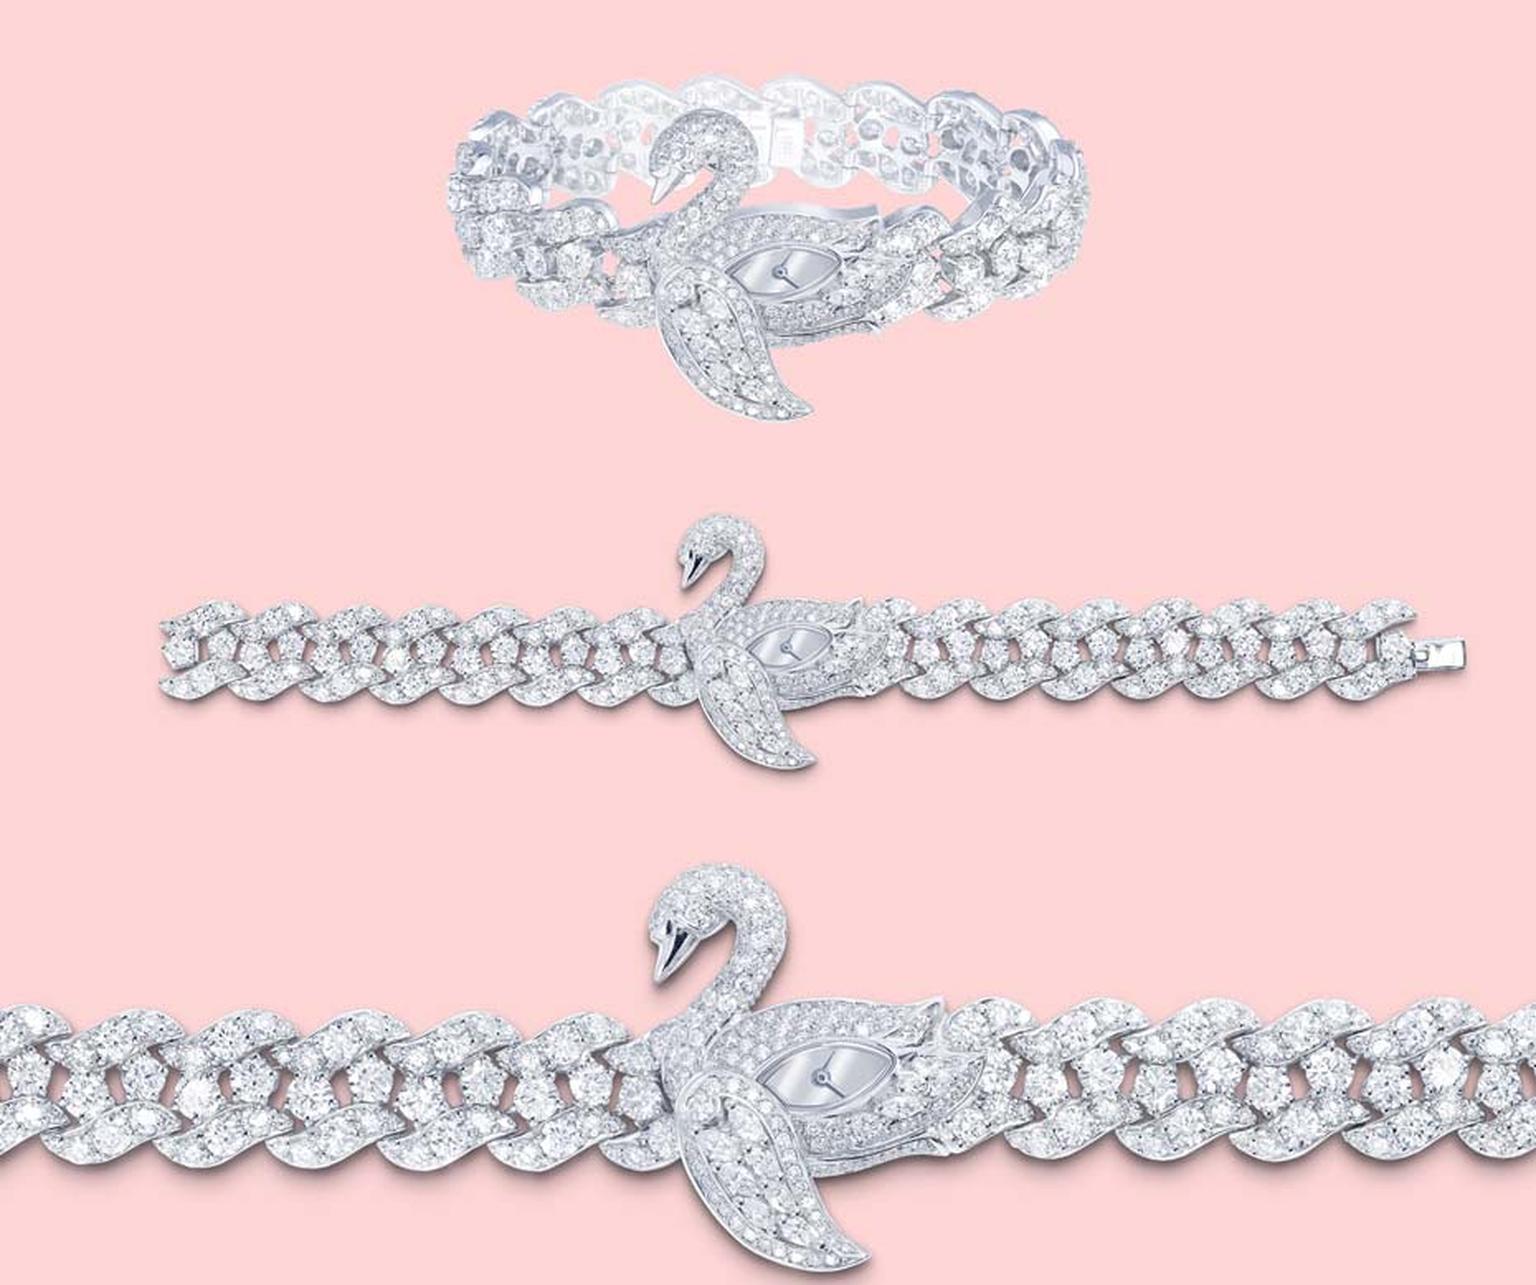 Graff watches Baby Swan features a delicate diamond wing that slides gracefully downwards, revealing the swan’s secret watch face. Set with 20 carats of the world's finest diamonds, the swan appears to float on a lake of sparkling water.